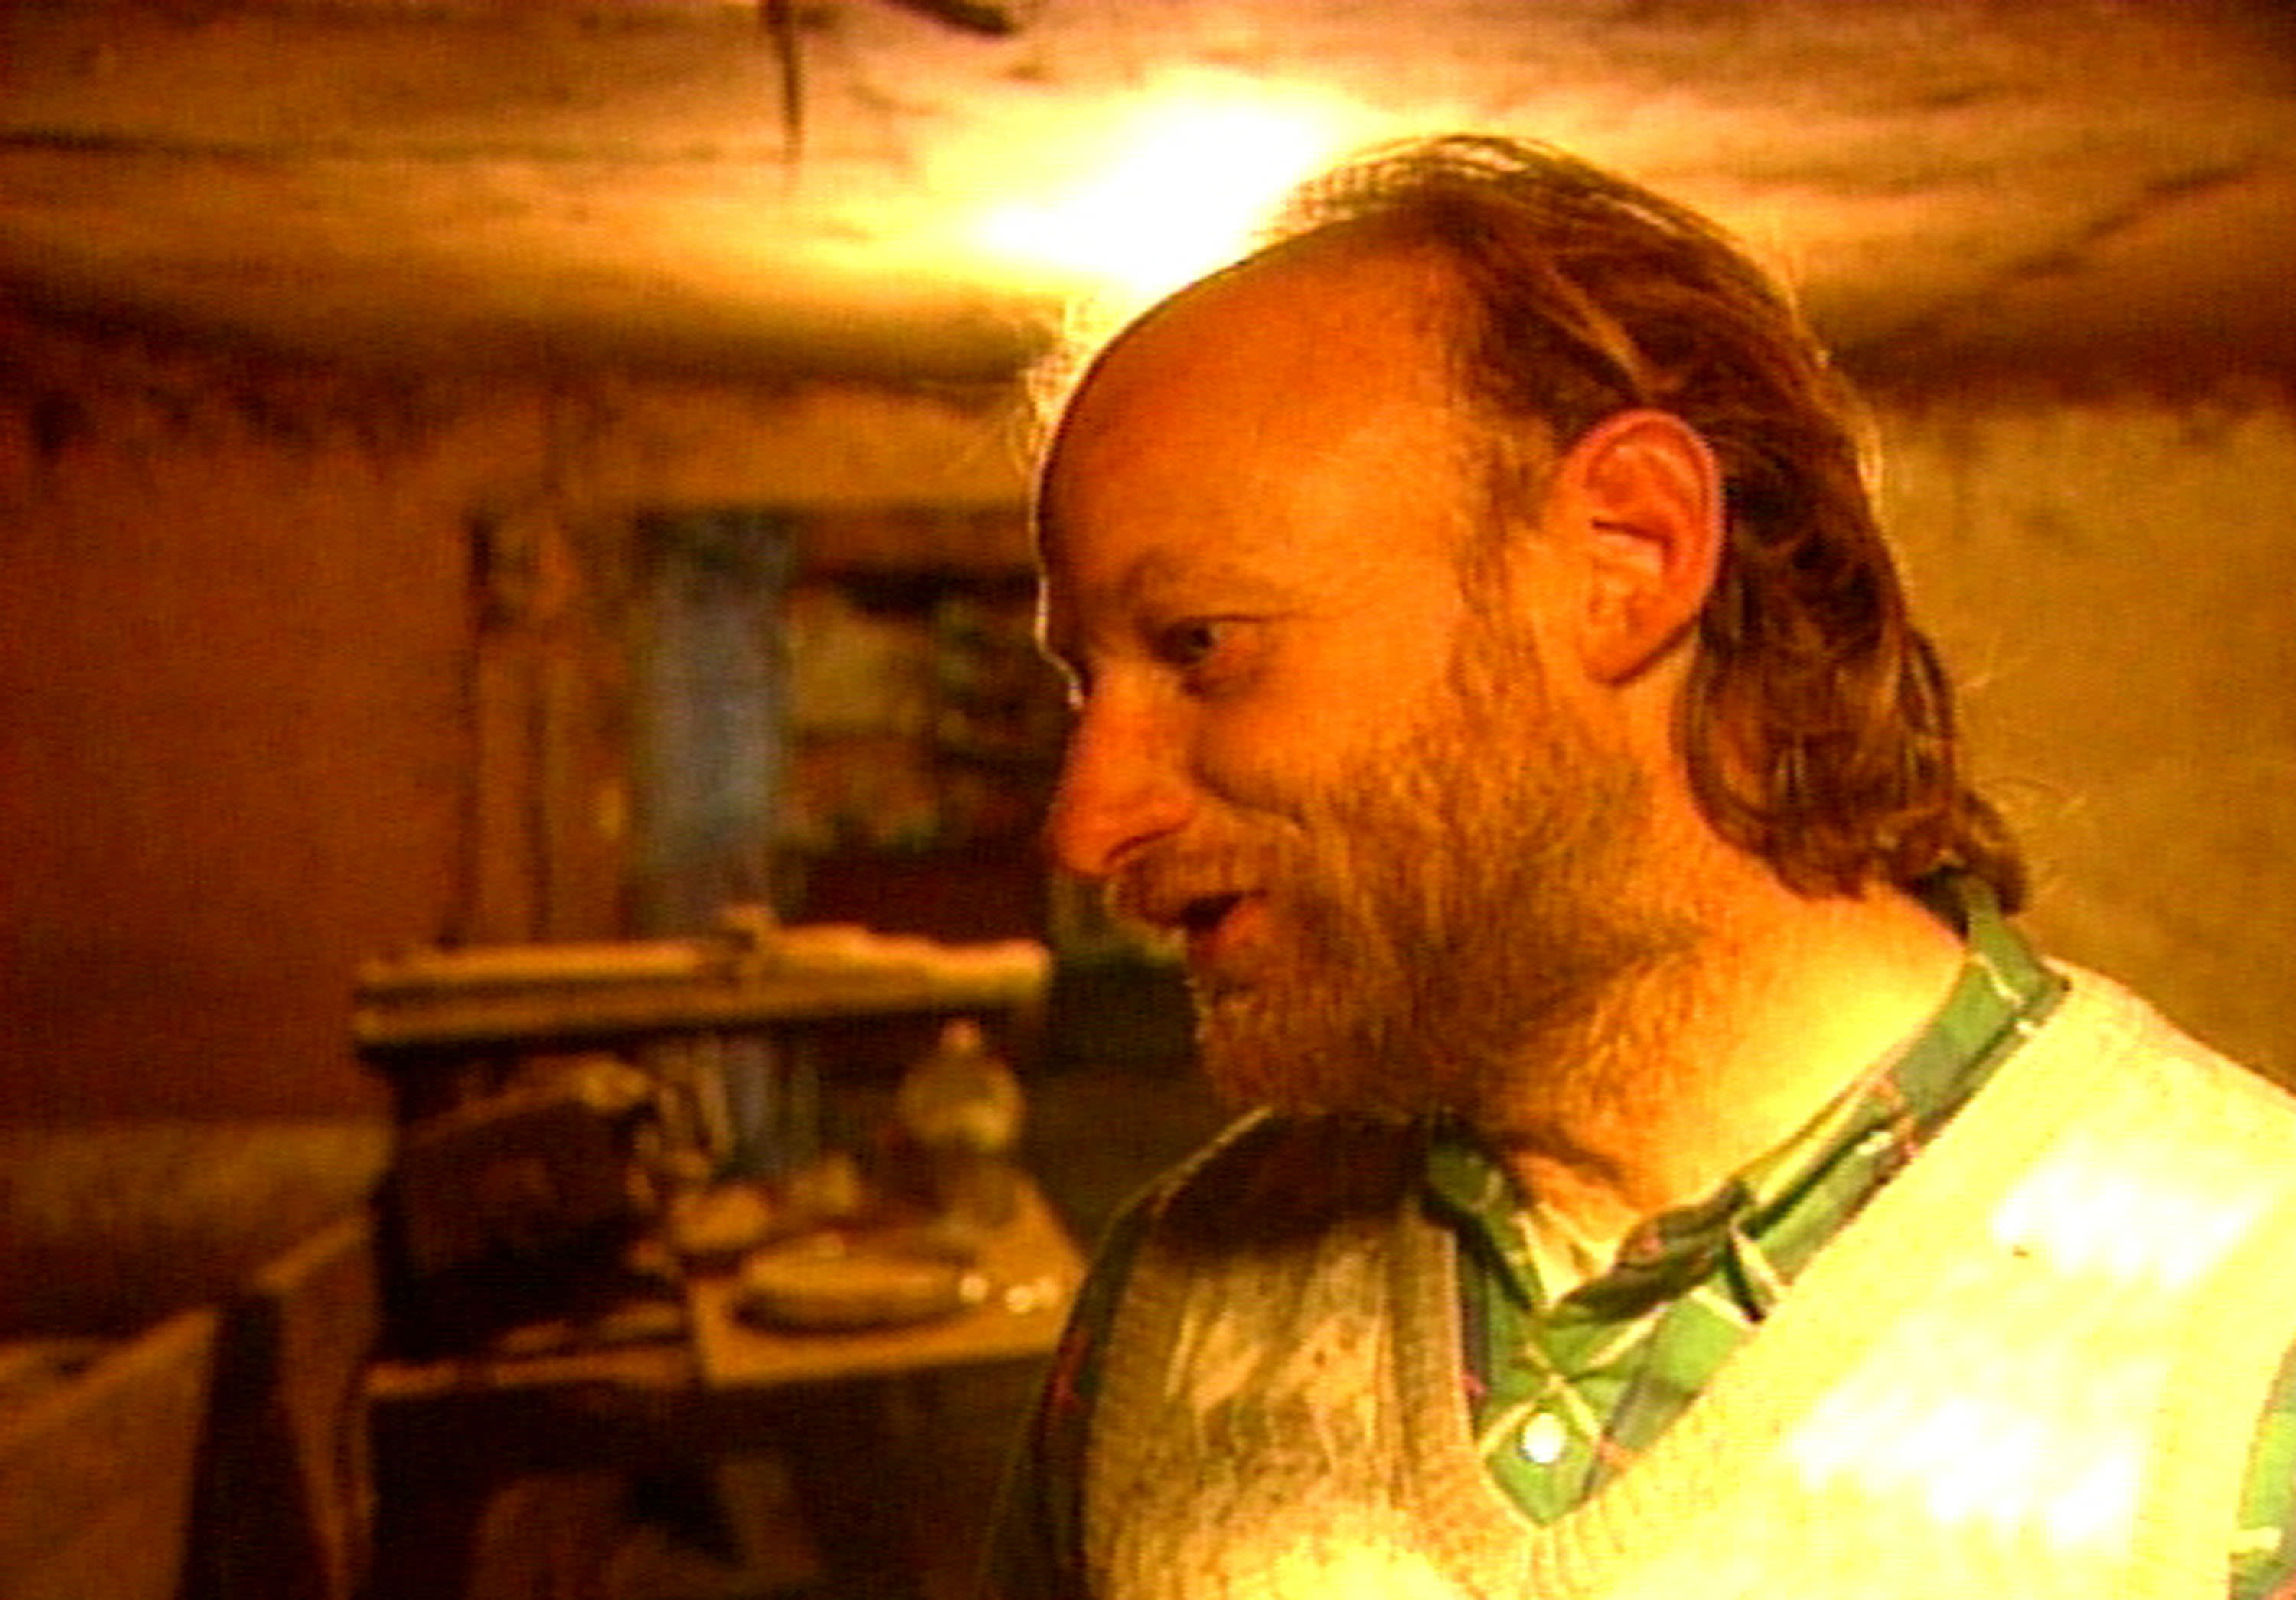 Serial killer Robert Pickton dies nearly two weeks after prison attack